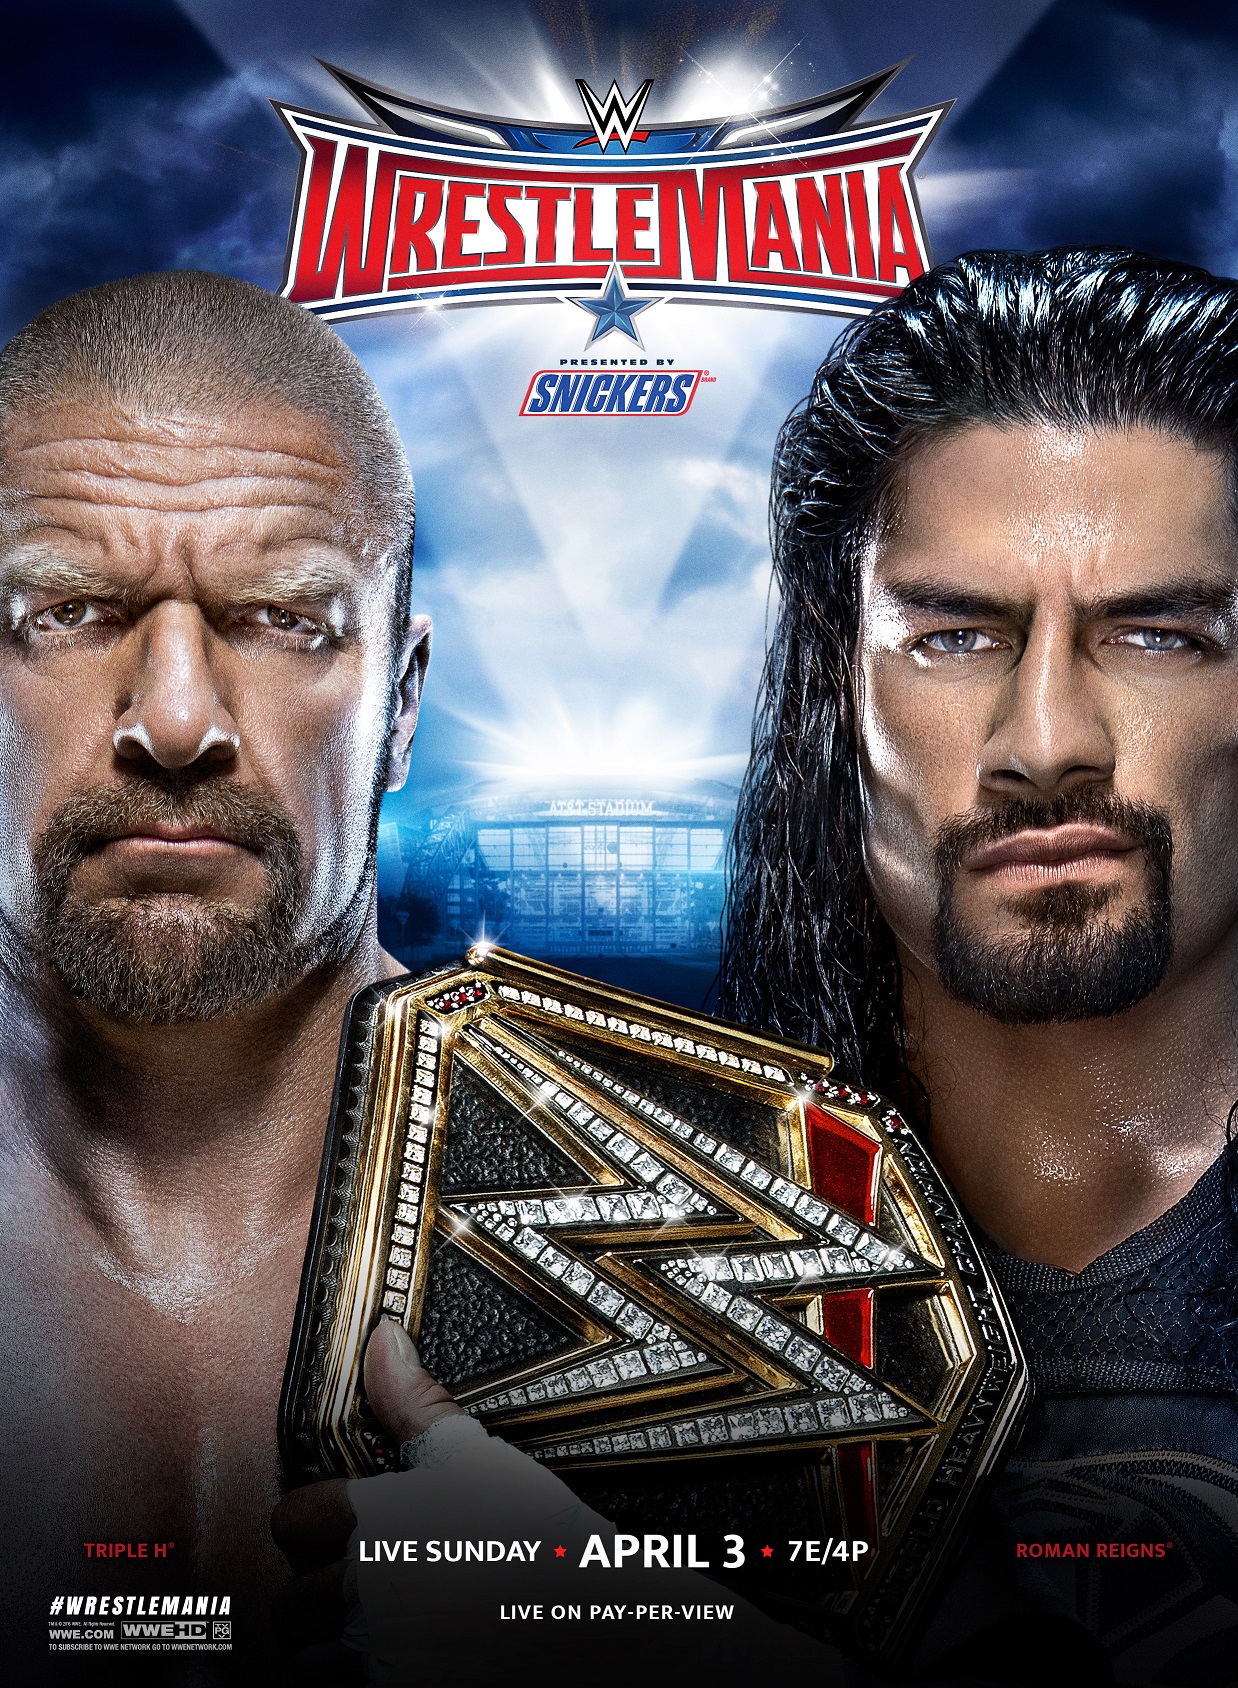 WWE WrestleMania 32 - live on Pay-Per-View